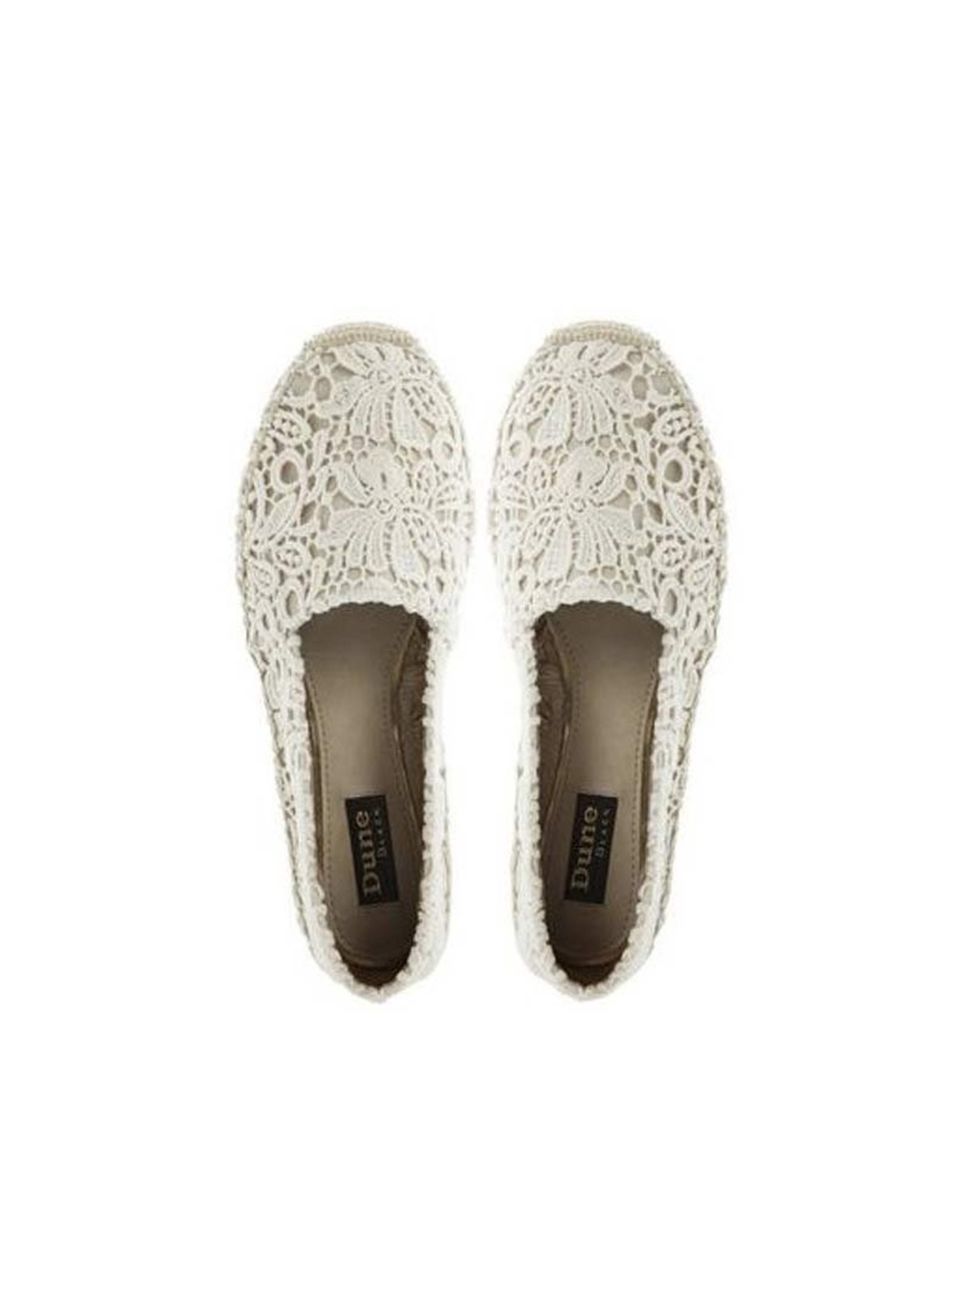 <p>Junior Sub-Editor Claire Sibbick will wear hers with a denim shirt dress and tortoiseshell sunnies.</p><p><a href="http://www.dunelondon.com/gayle-dune-black-lace-detail-espadrille-shoe-0849505900002133/">Dune</a> espadrilles, £99</p>